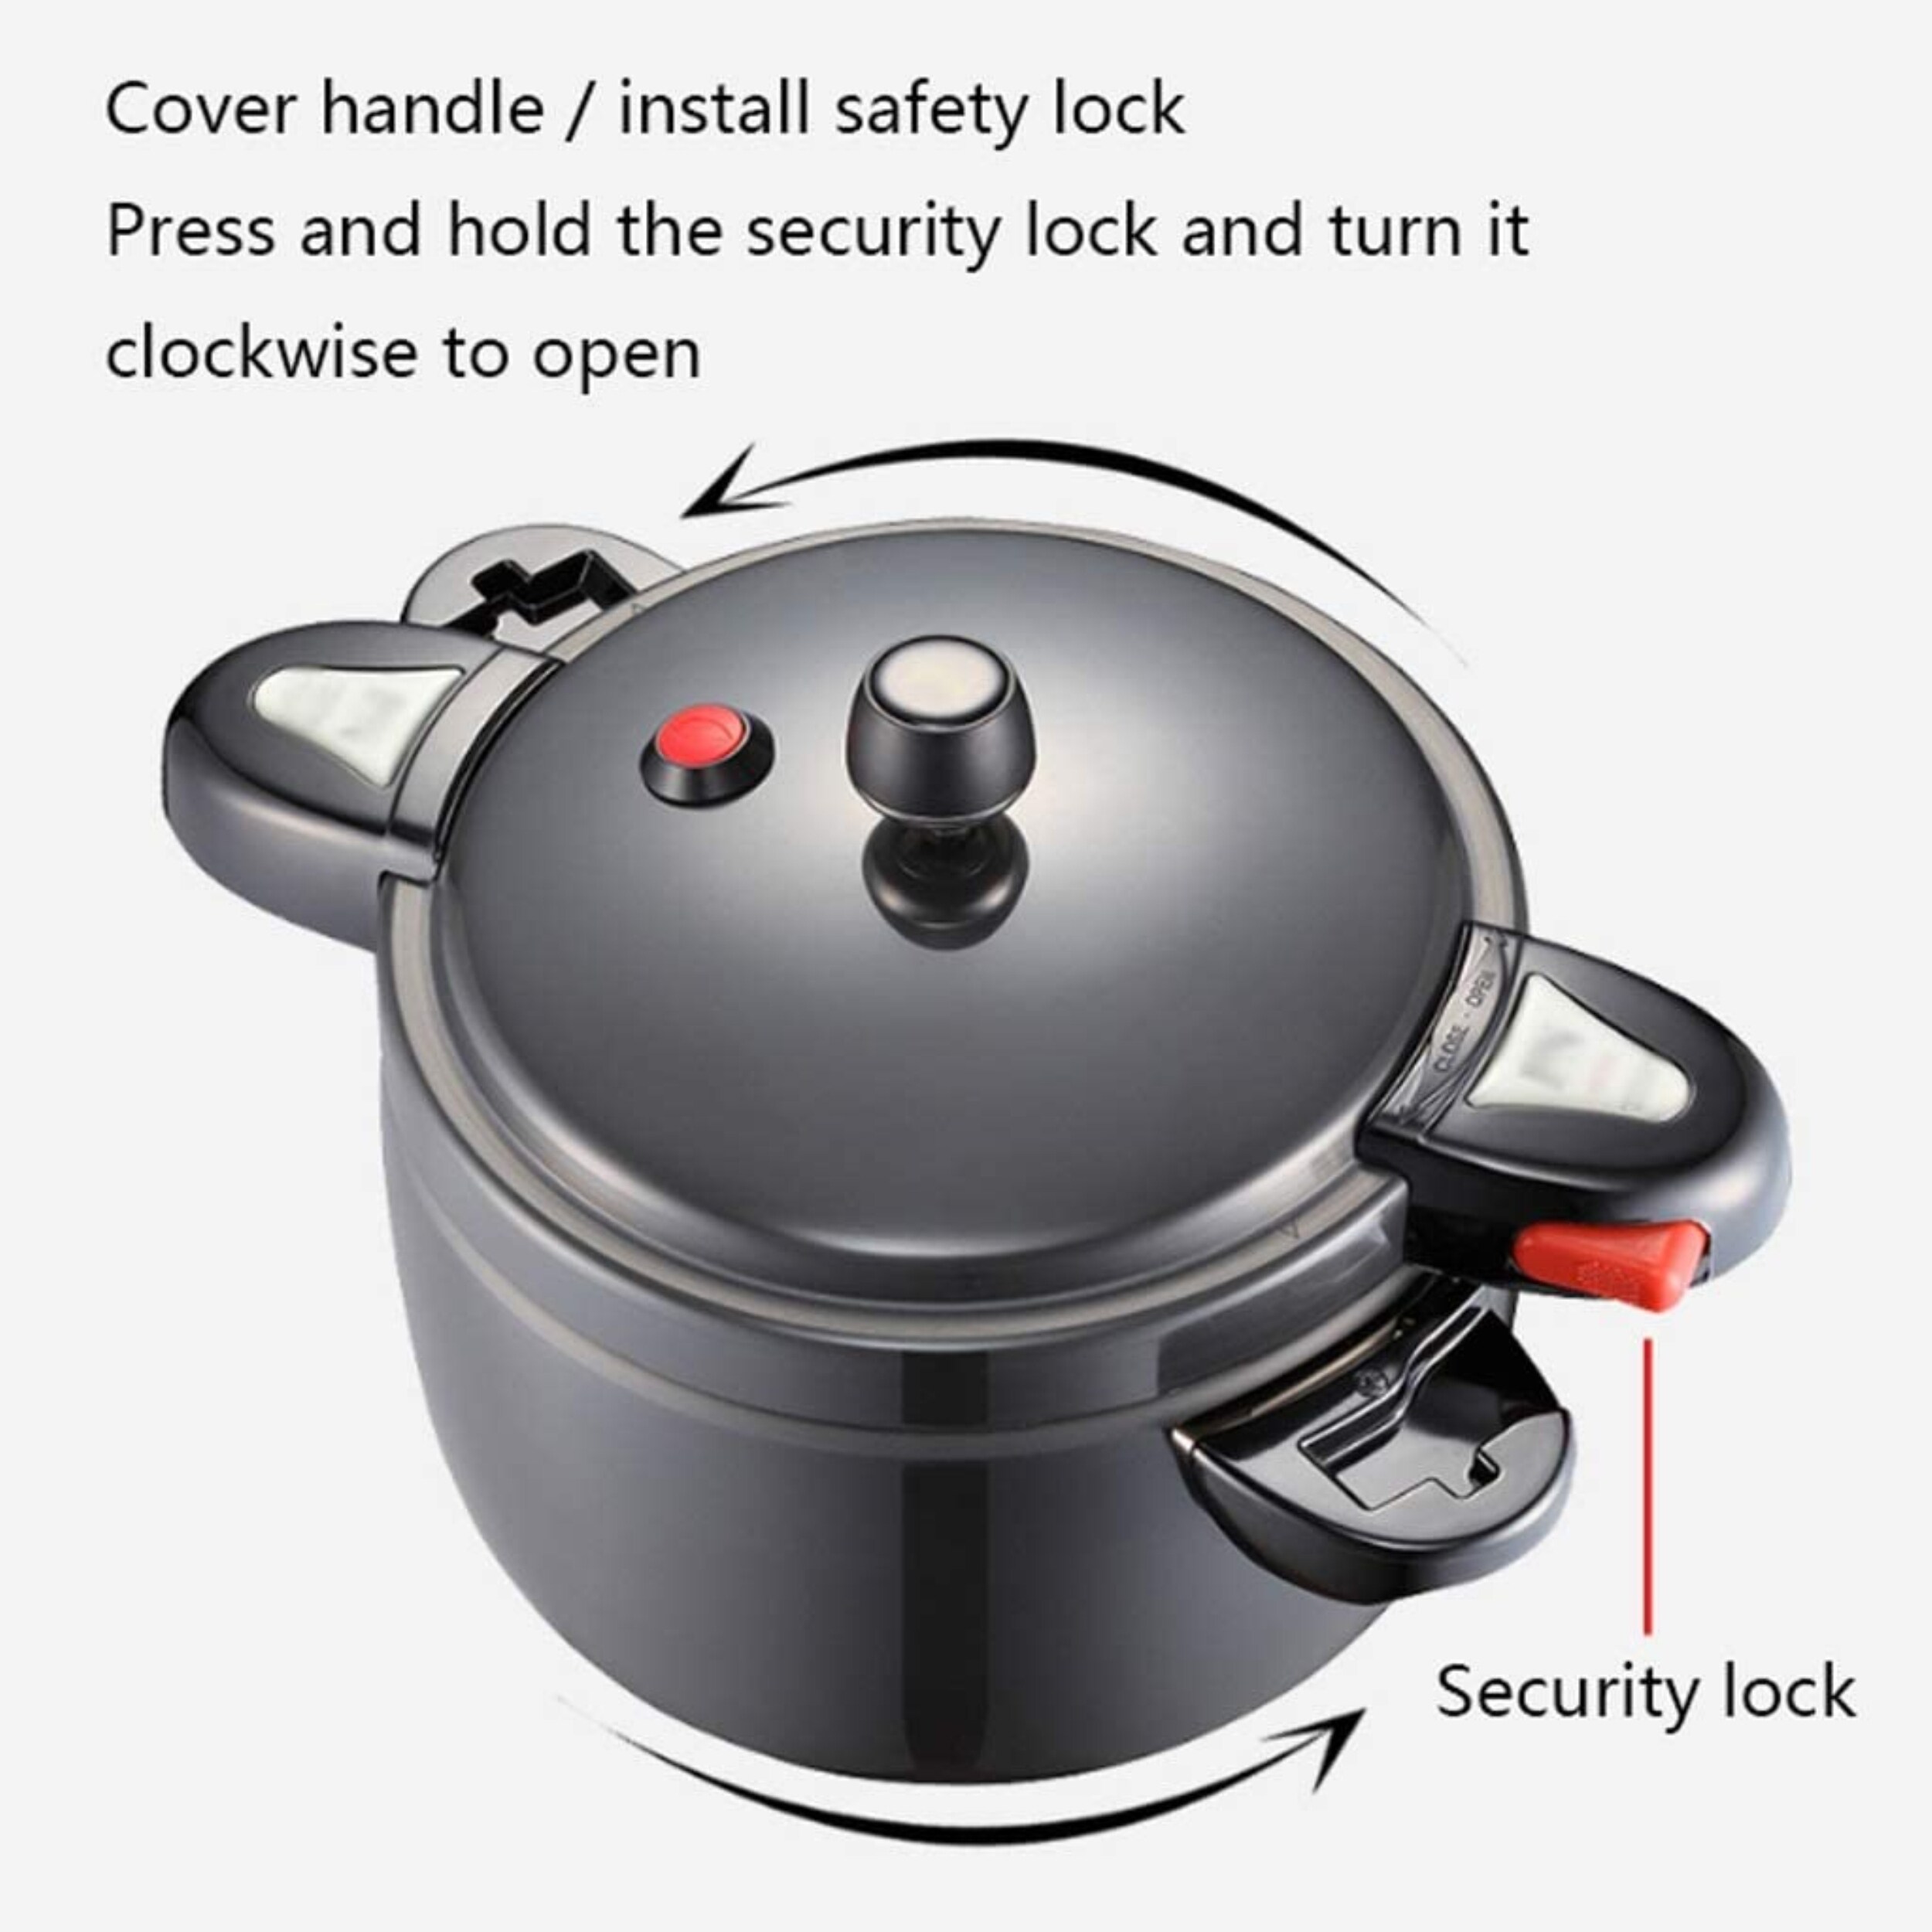 https://ak1.ostkcdn.com/images/products/is/images/direct/bf702cab16f4c3204e44d32e838bea6af1a107a7/Pressure-Cookers-Safety-Explosion-proof-Mini-Pressure-Cooker-Size-%3A-2.5l.jpg